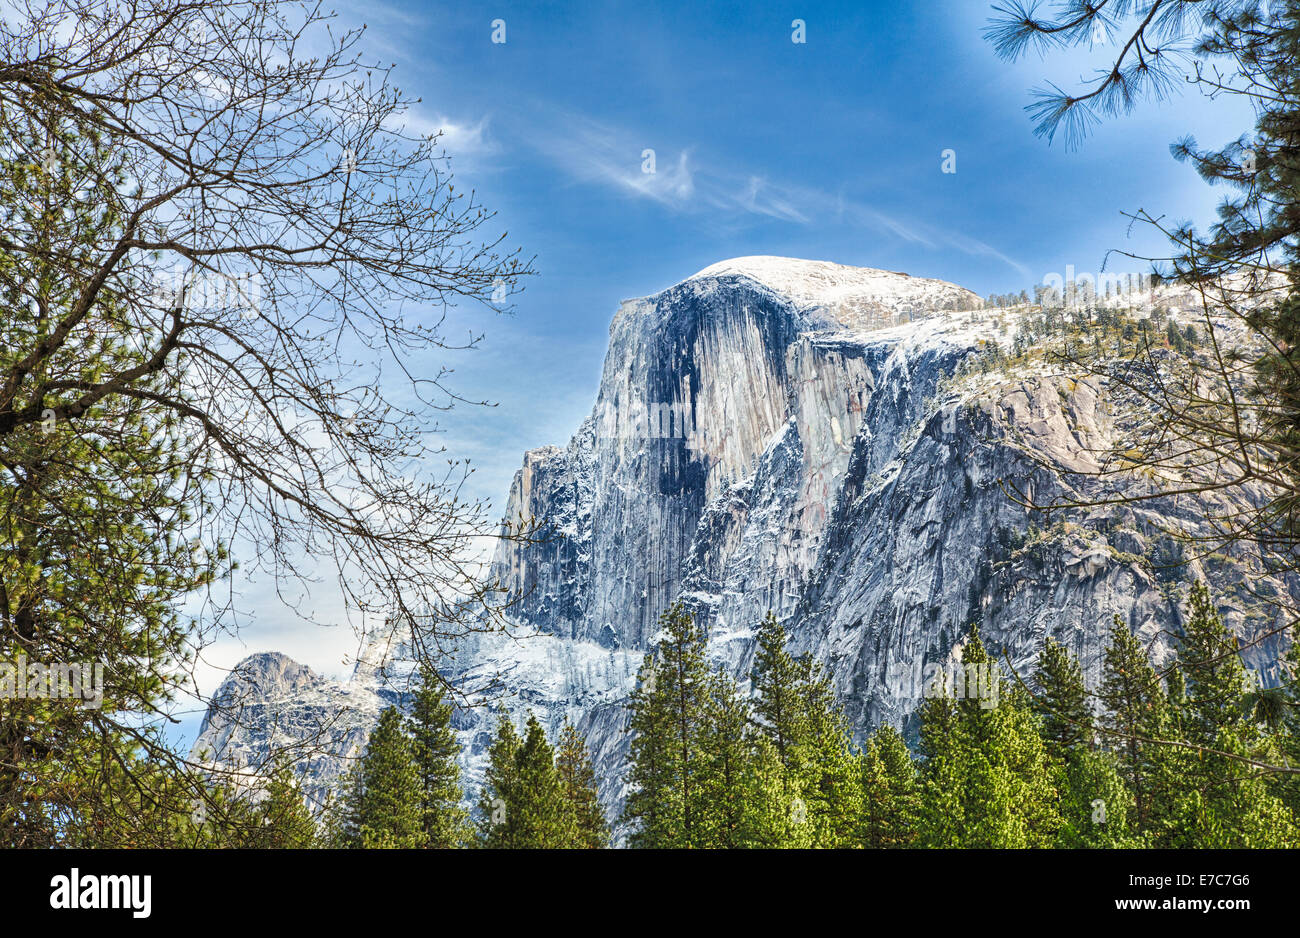 Half Dome peaks above the tree tops as seen from the valley below. Yosemite National Park, California. Stock Photo